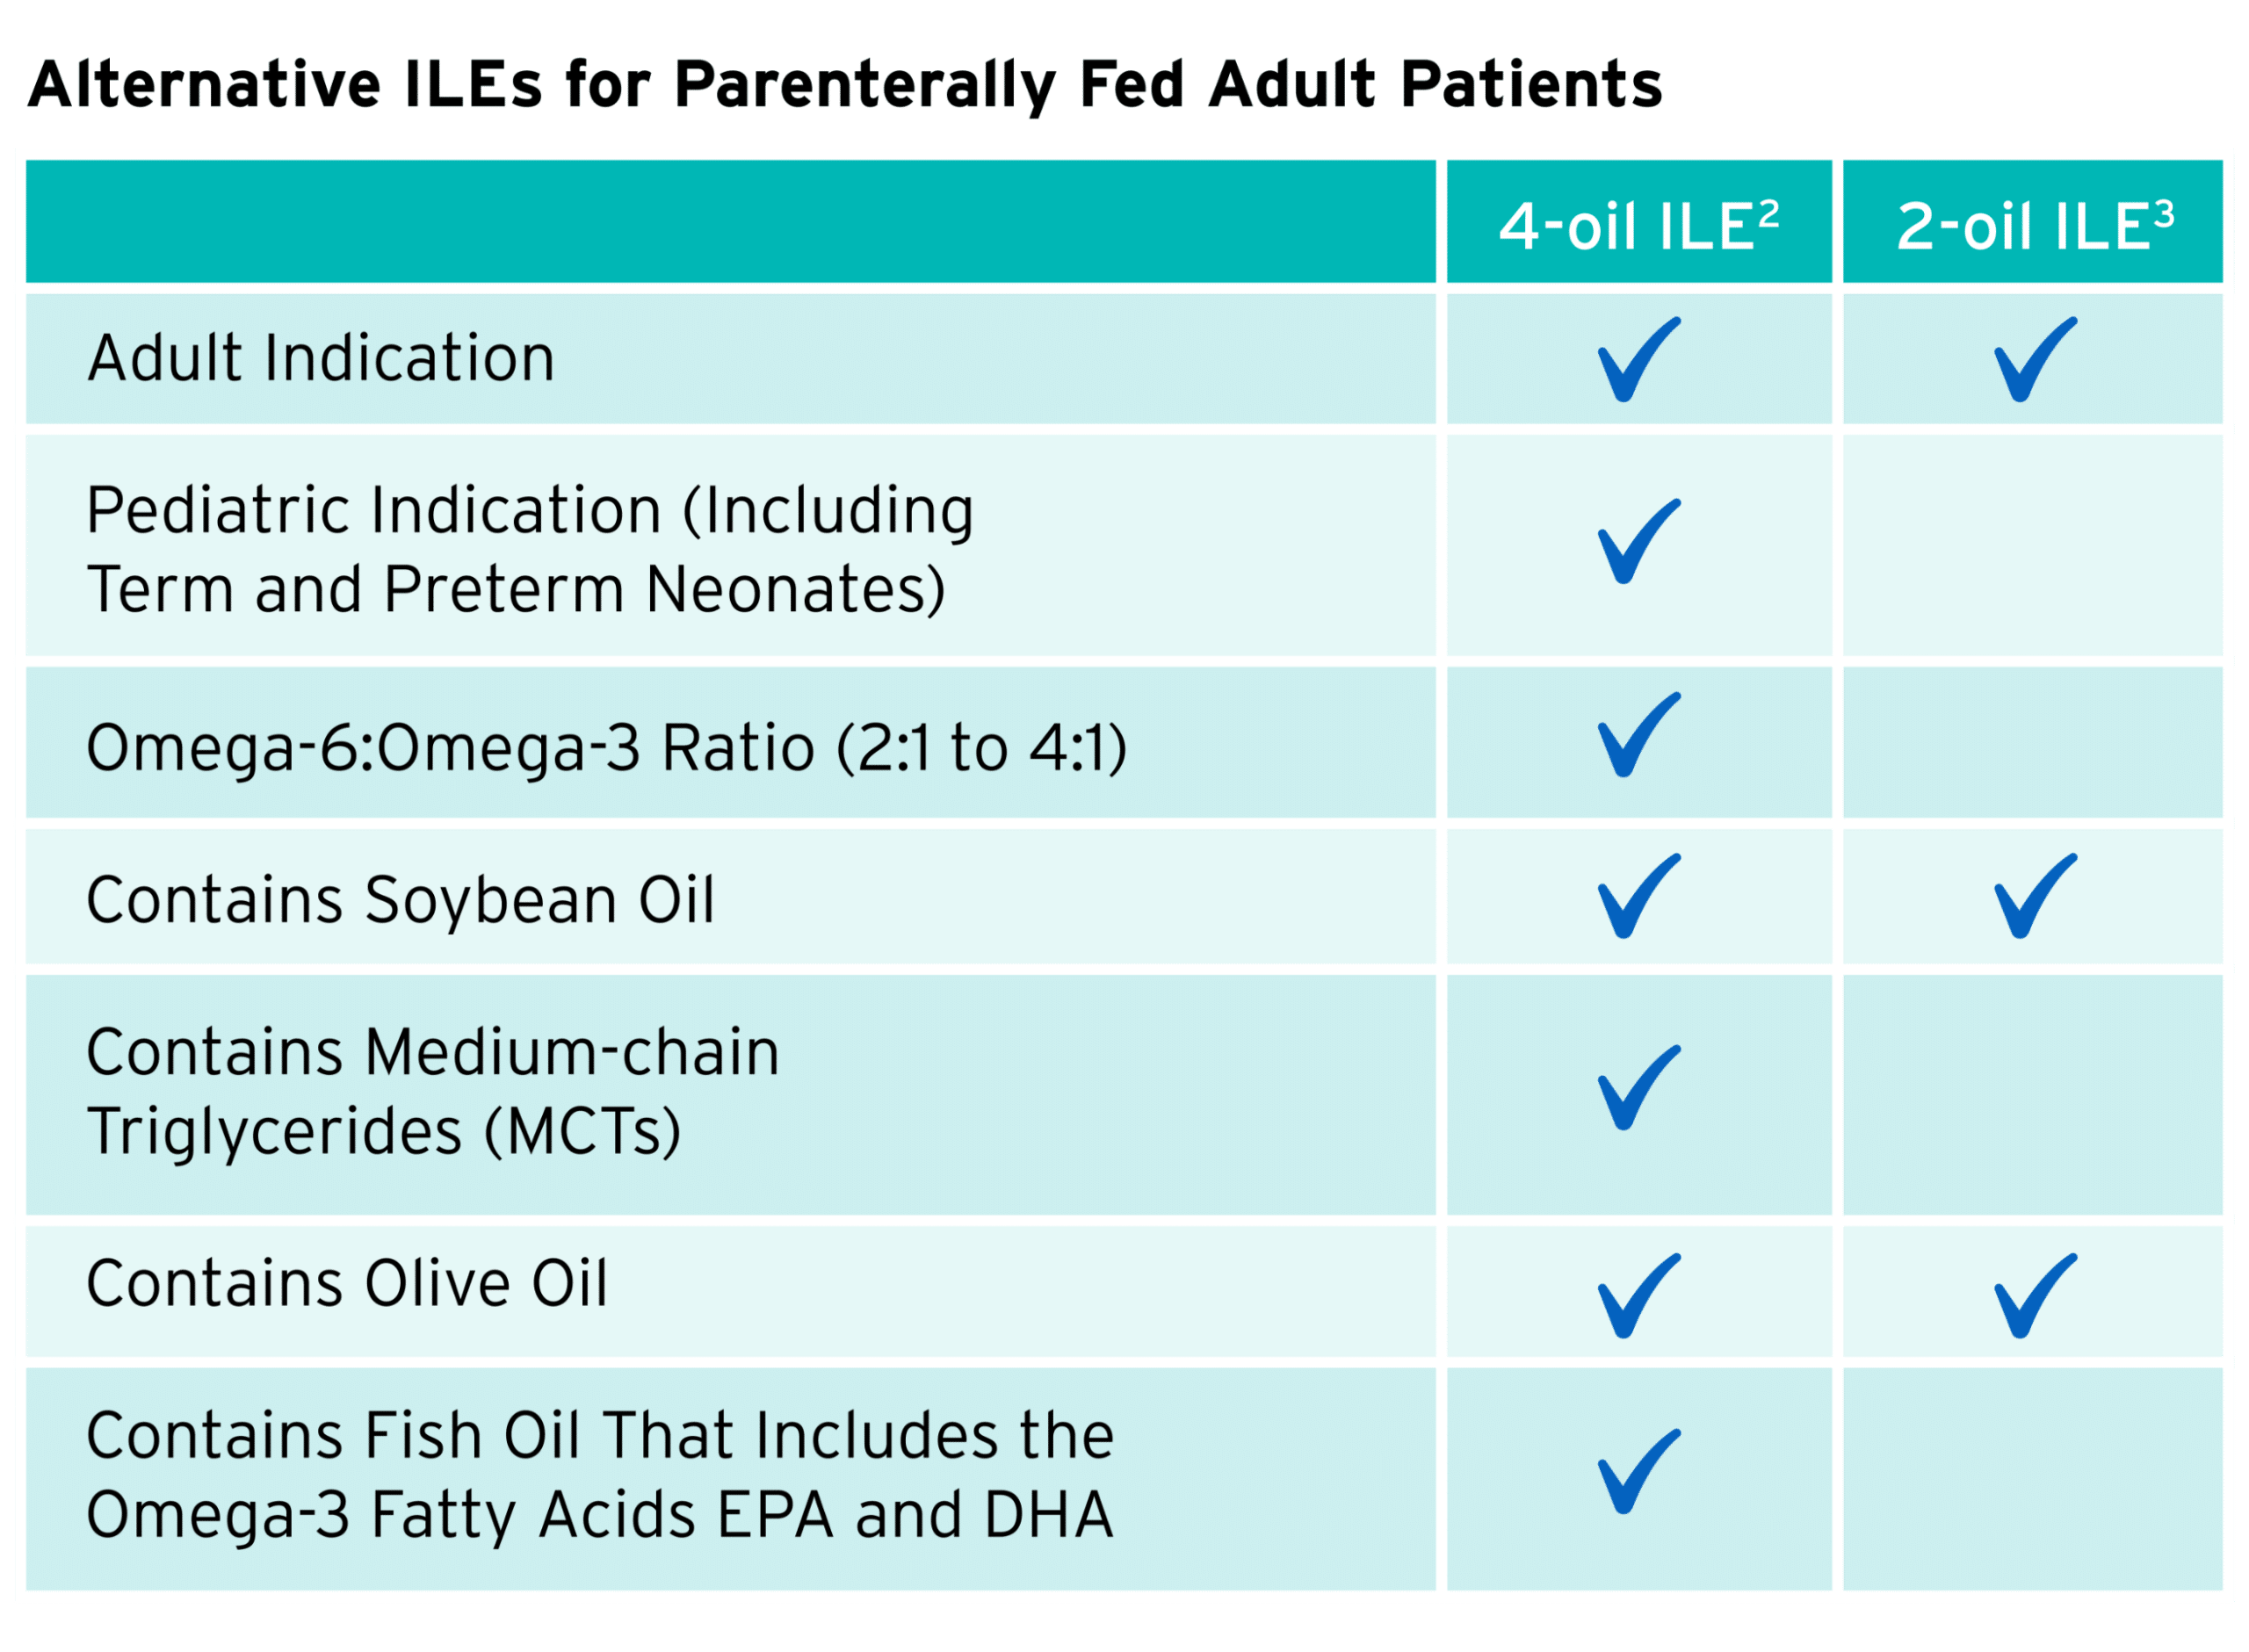 Table: Alternative ILEs for Parenterally Fed Adult Patients